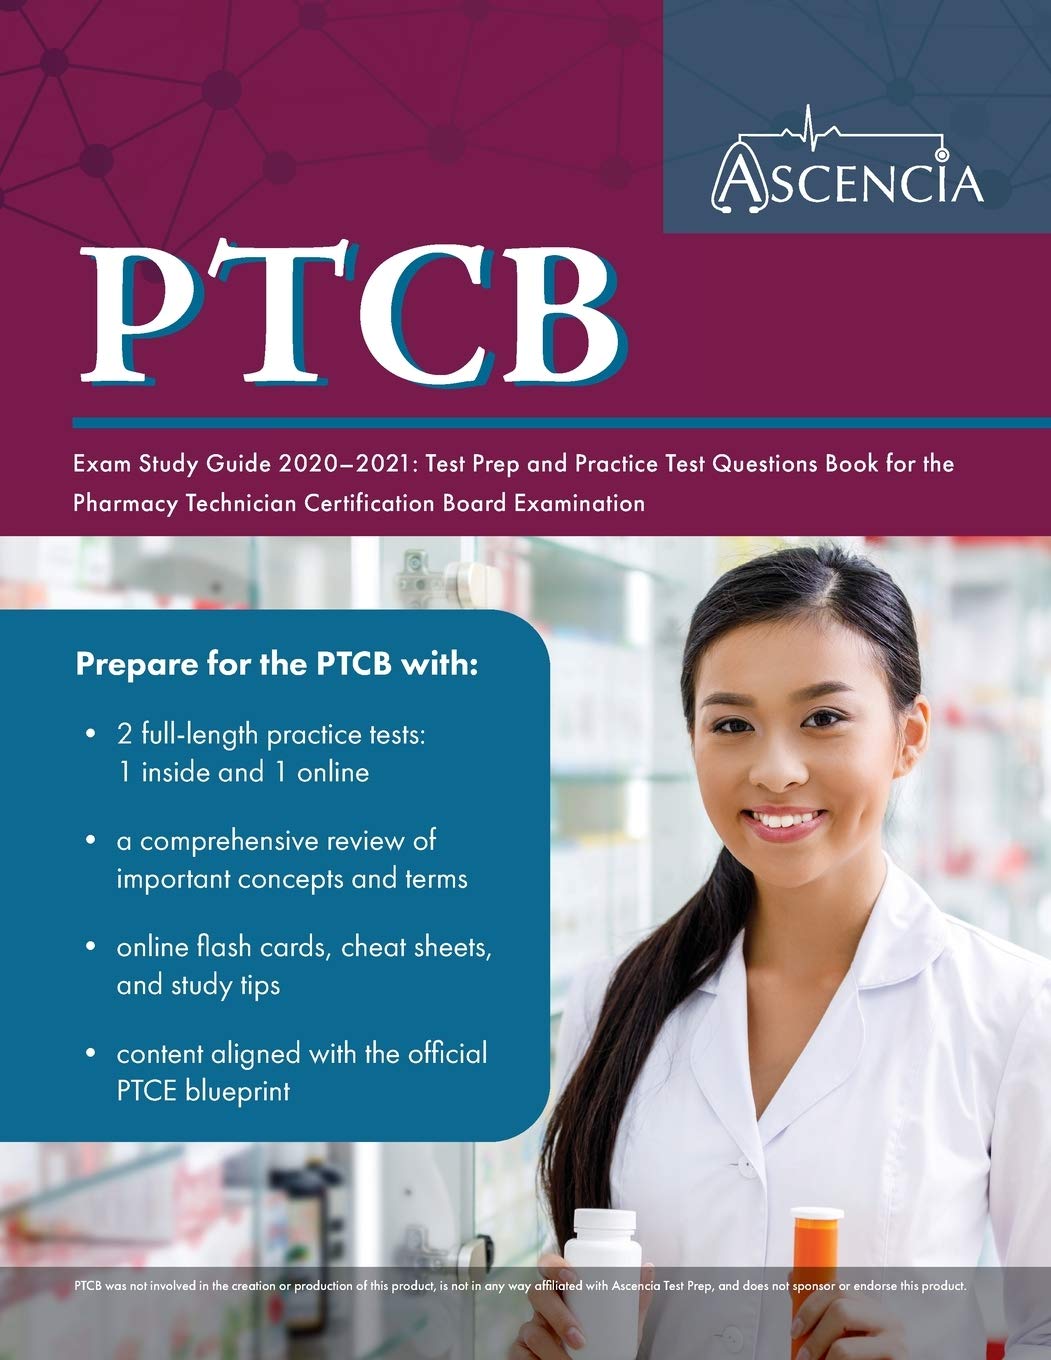 PTCB Exam Study Guide 2020-2021: Test Prep and Practice Test Questions Book for the Pharmacy Technician Certification Board Examination